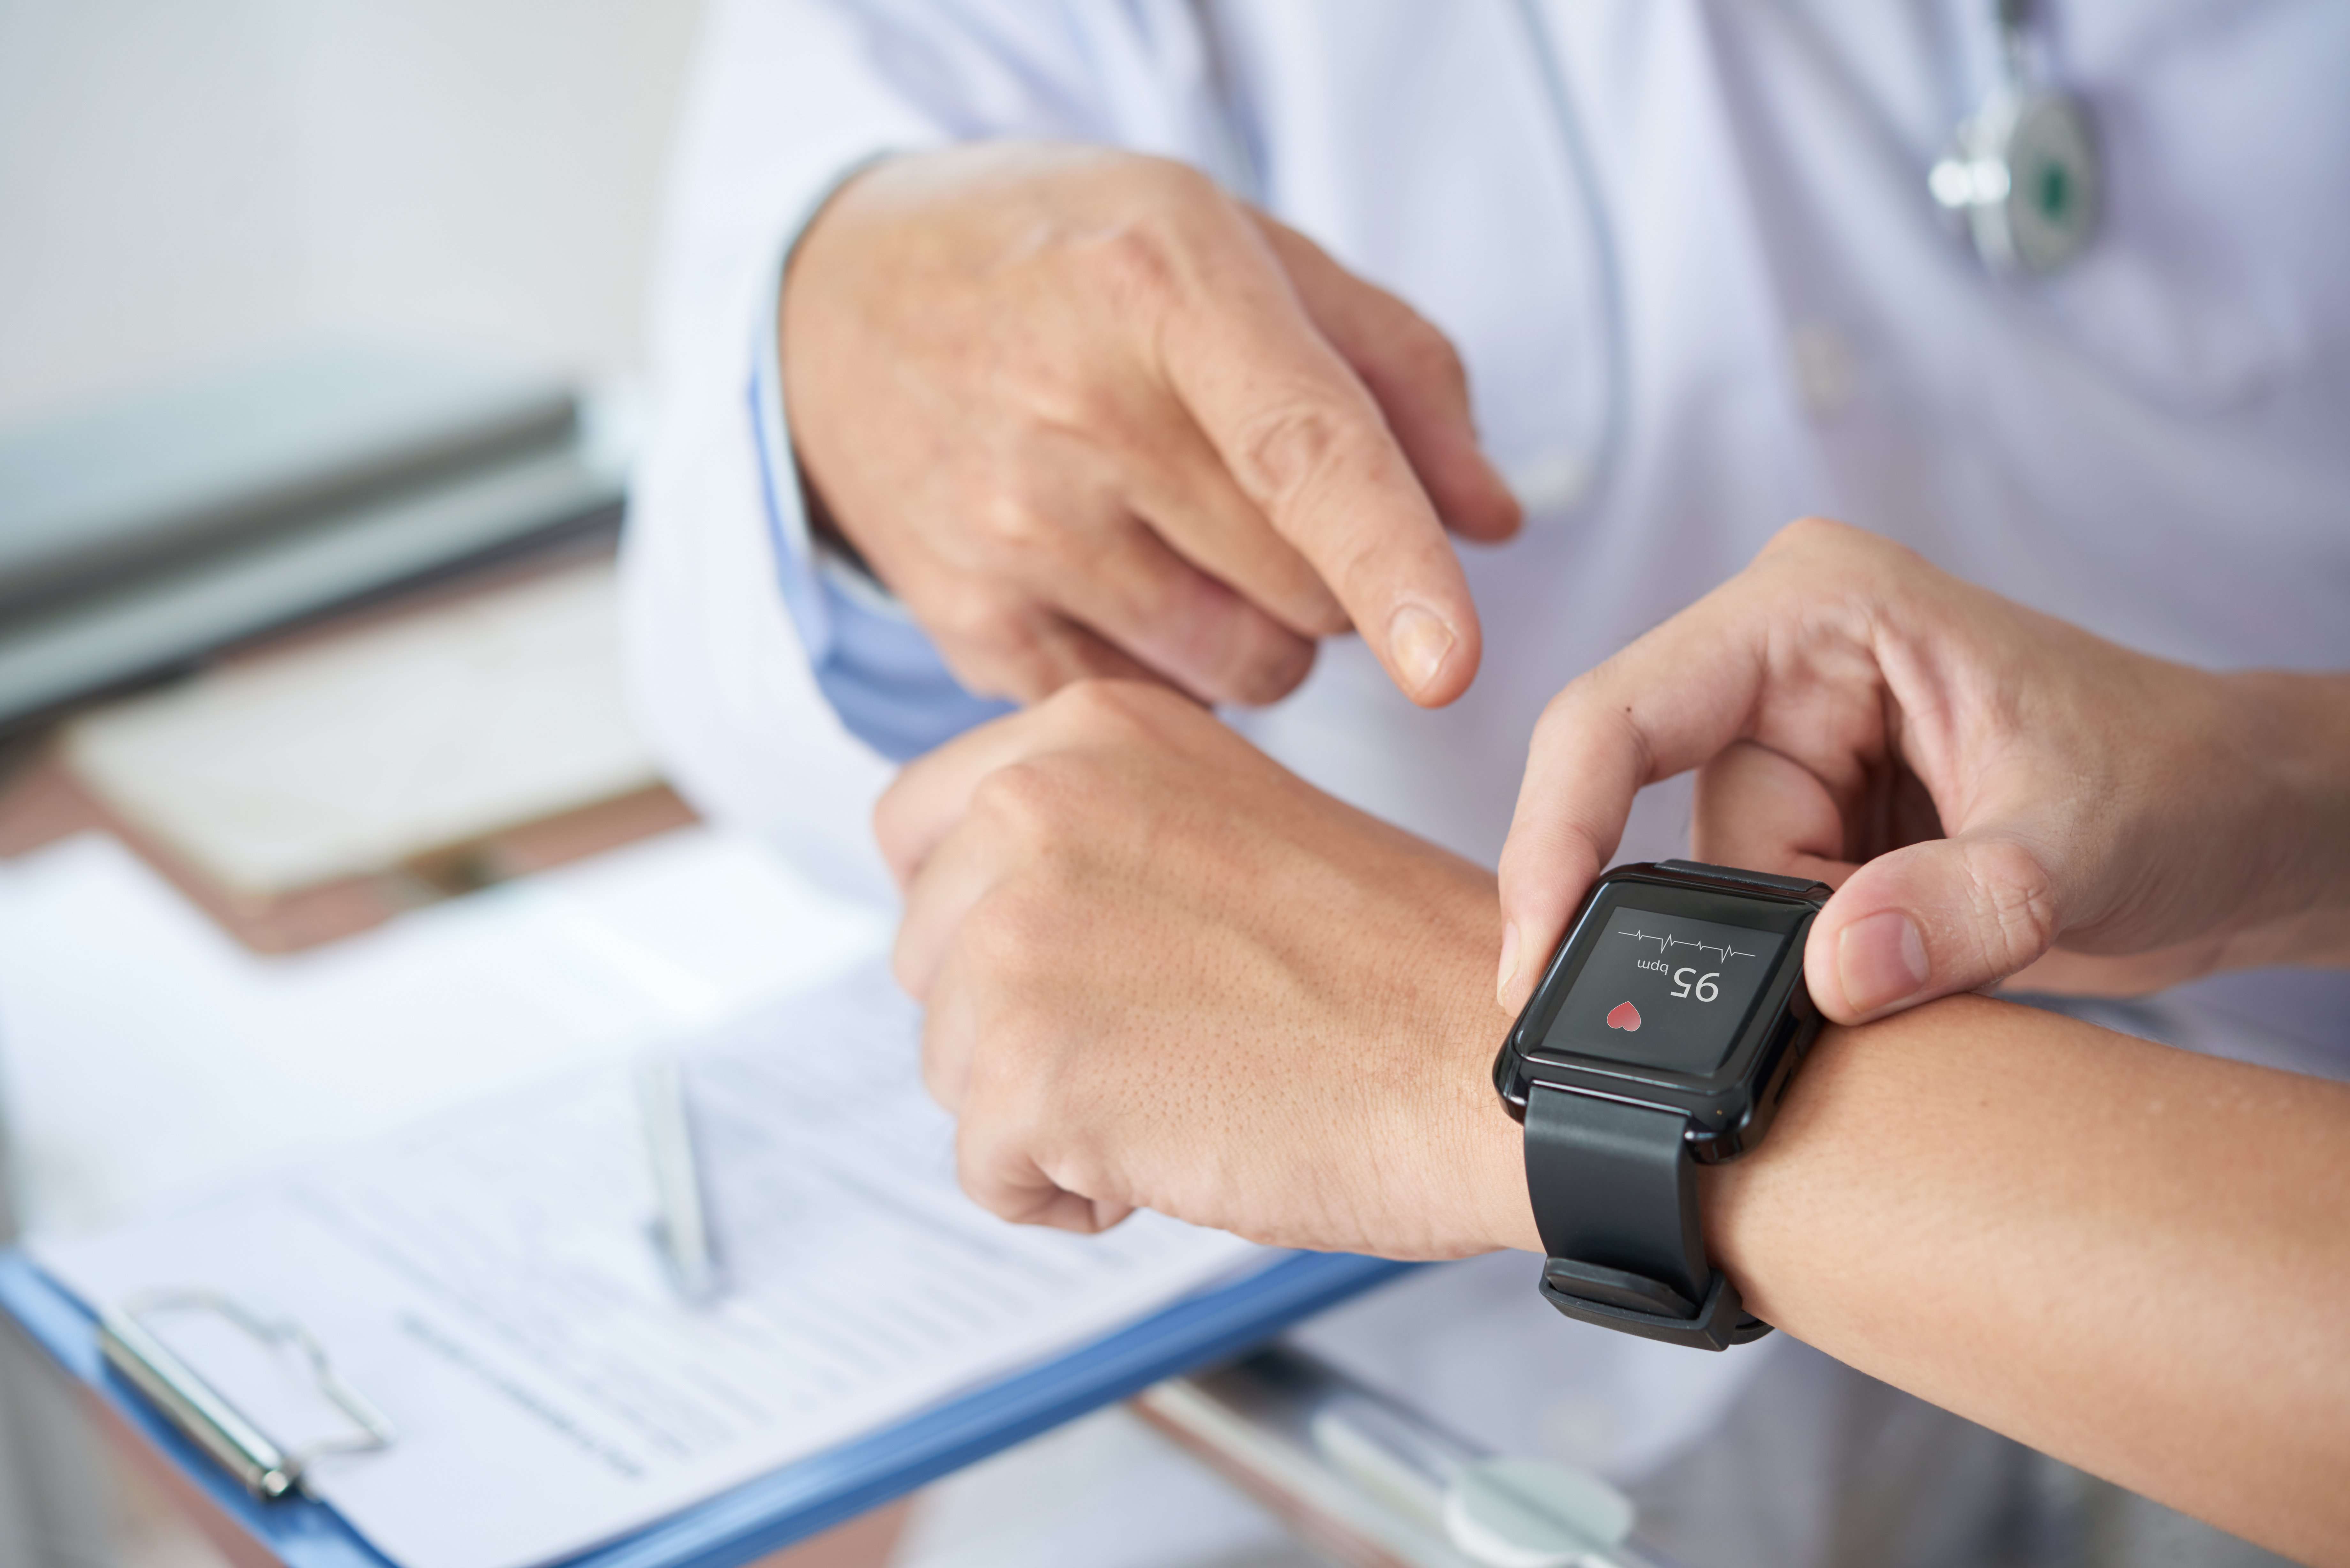 More wearables shift from fitness to clinical use with new Samsung and AT&T smartwatches | FierceHe…